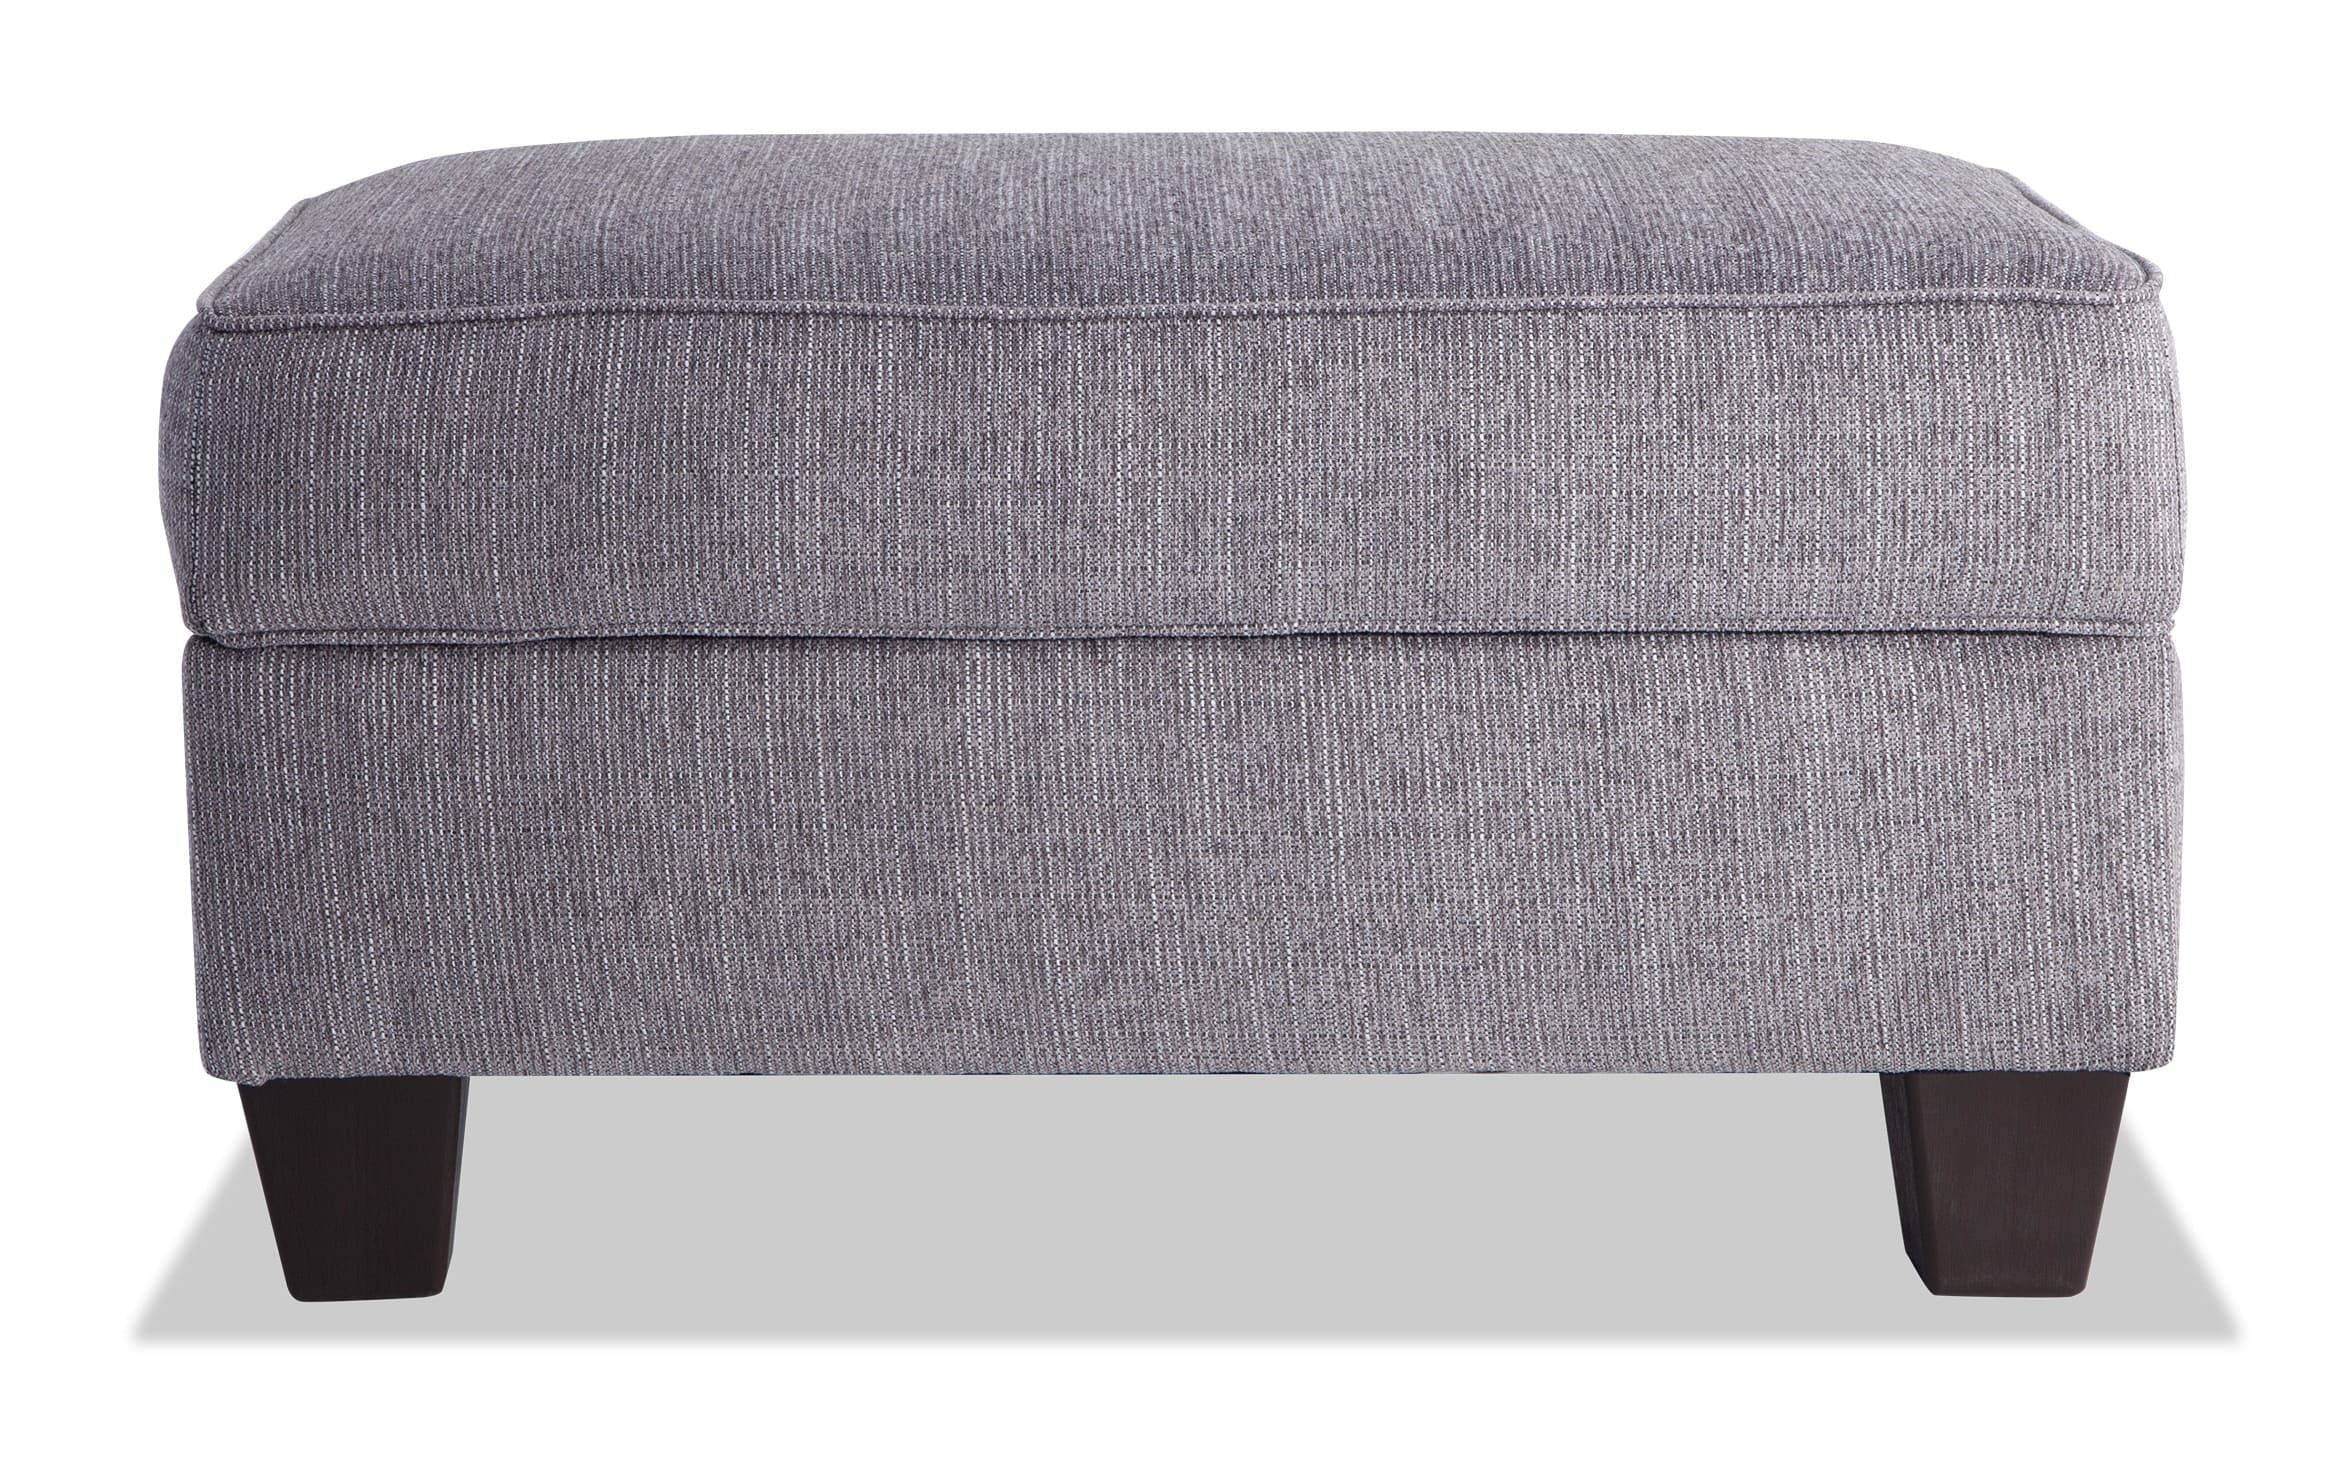 White Ottoman Bench Photo | Westgrovesouthpark Throughout White And Light Gray Cylinder Pouf Ottomans (View 7 of 20)